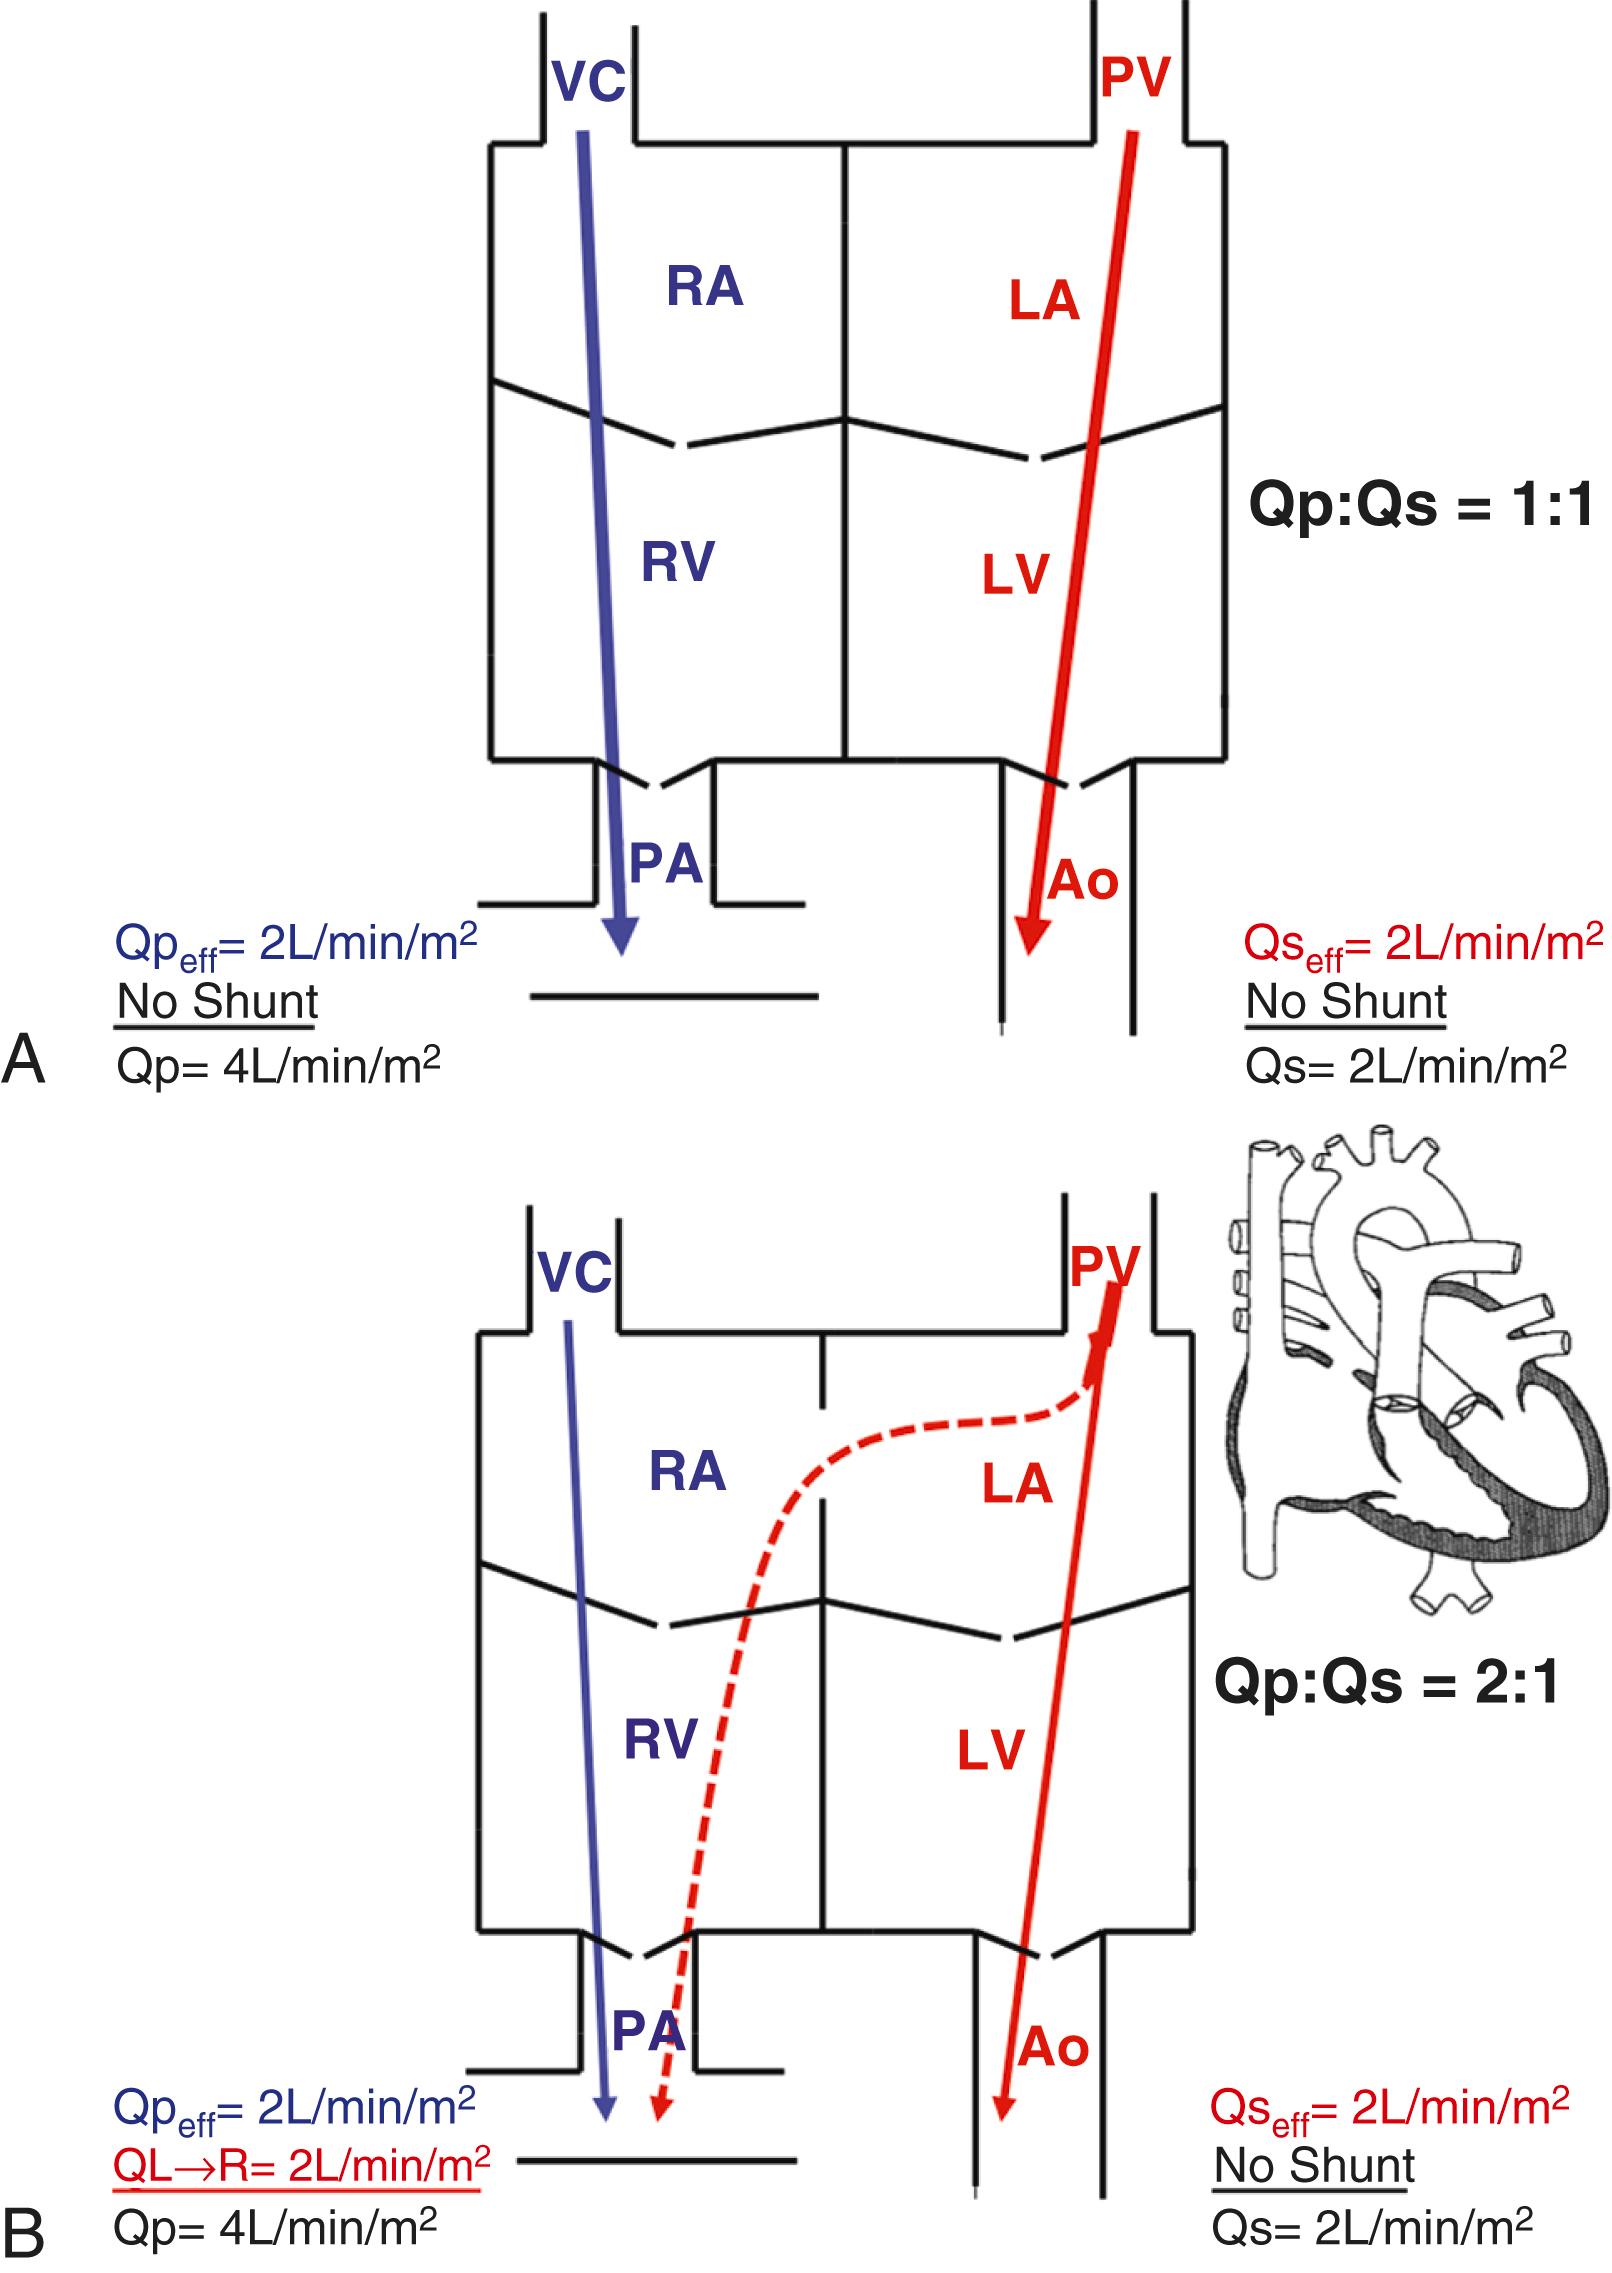 Figure 16.1, Diagram comparing (A) a normal heart and (B) a heart with an atrial septal defect (ASD) to depict the concepts of physiologic shunt (recirculated flow), effective blood flow (nutritive flow), and total pulmonary blood flow (Q P ) and total systemic blood flow (Q S ) . See description in the text. Ao , Aorta; LA , left atrium; LV , left ventricle; PA , pulmonary artery; PV , pulmonary vein; RA , right atrium; RV , right ventricle; VC , vena cava; QL-R , left to right shunt; QPeff , effective pulmonary blood flow; QSeff , effective systemic blood flow.